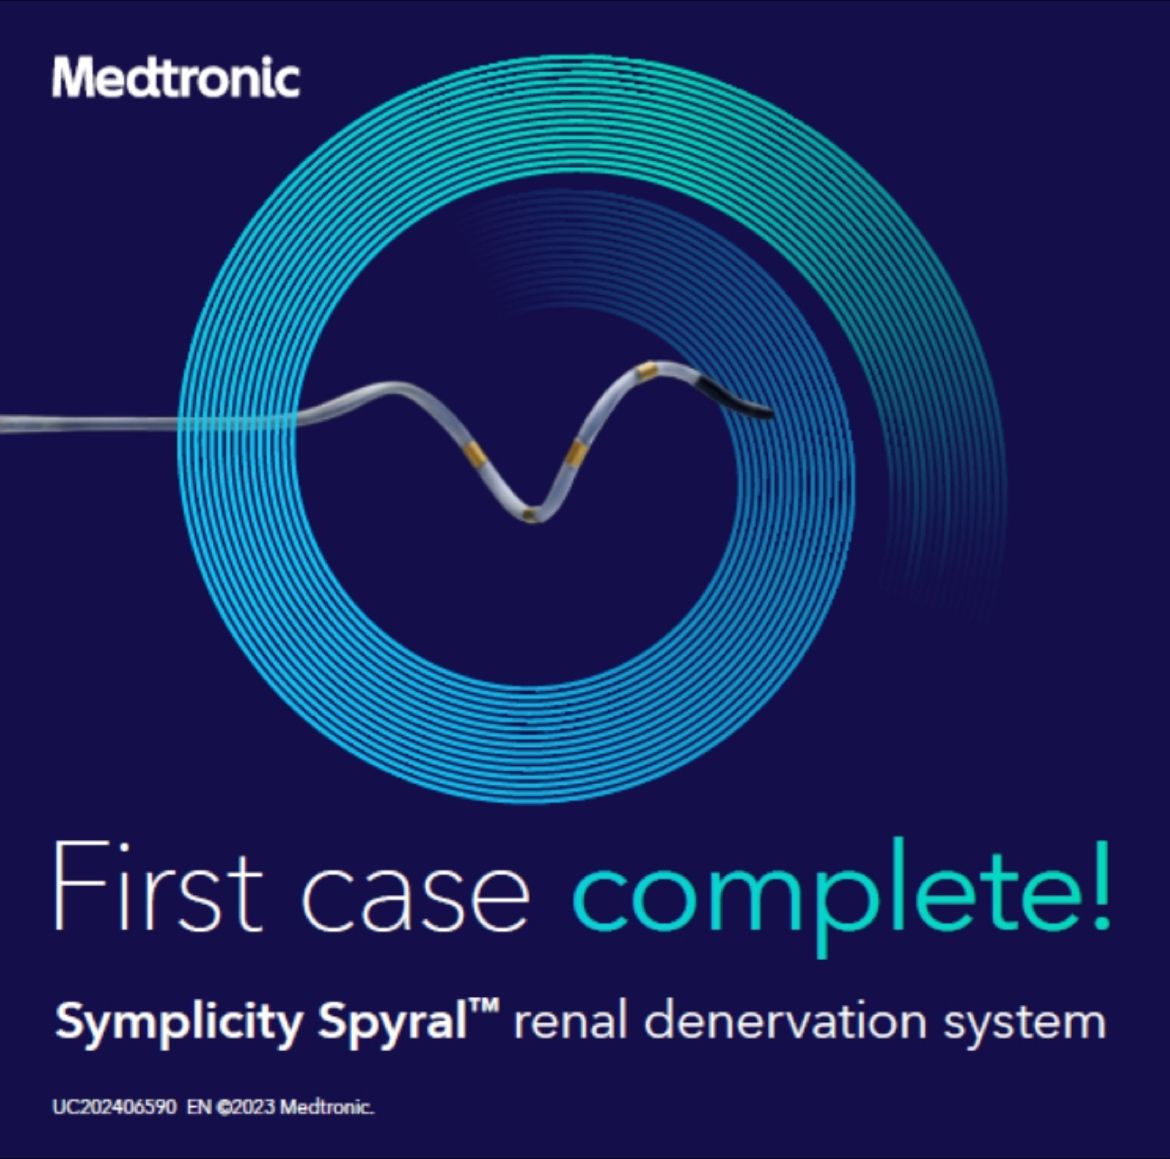 Congratulations to @kamalguptamd and the Cardiovascular Cath Lab Team at the The University of Kansas Health System for their FIRST case with Symplicity Spyral renal (RDN) denervation system in the area! What an exciting accomplishment!